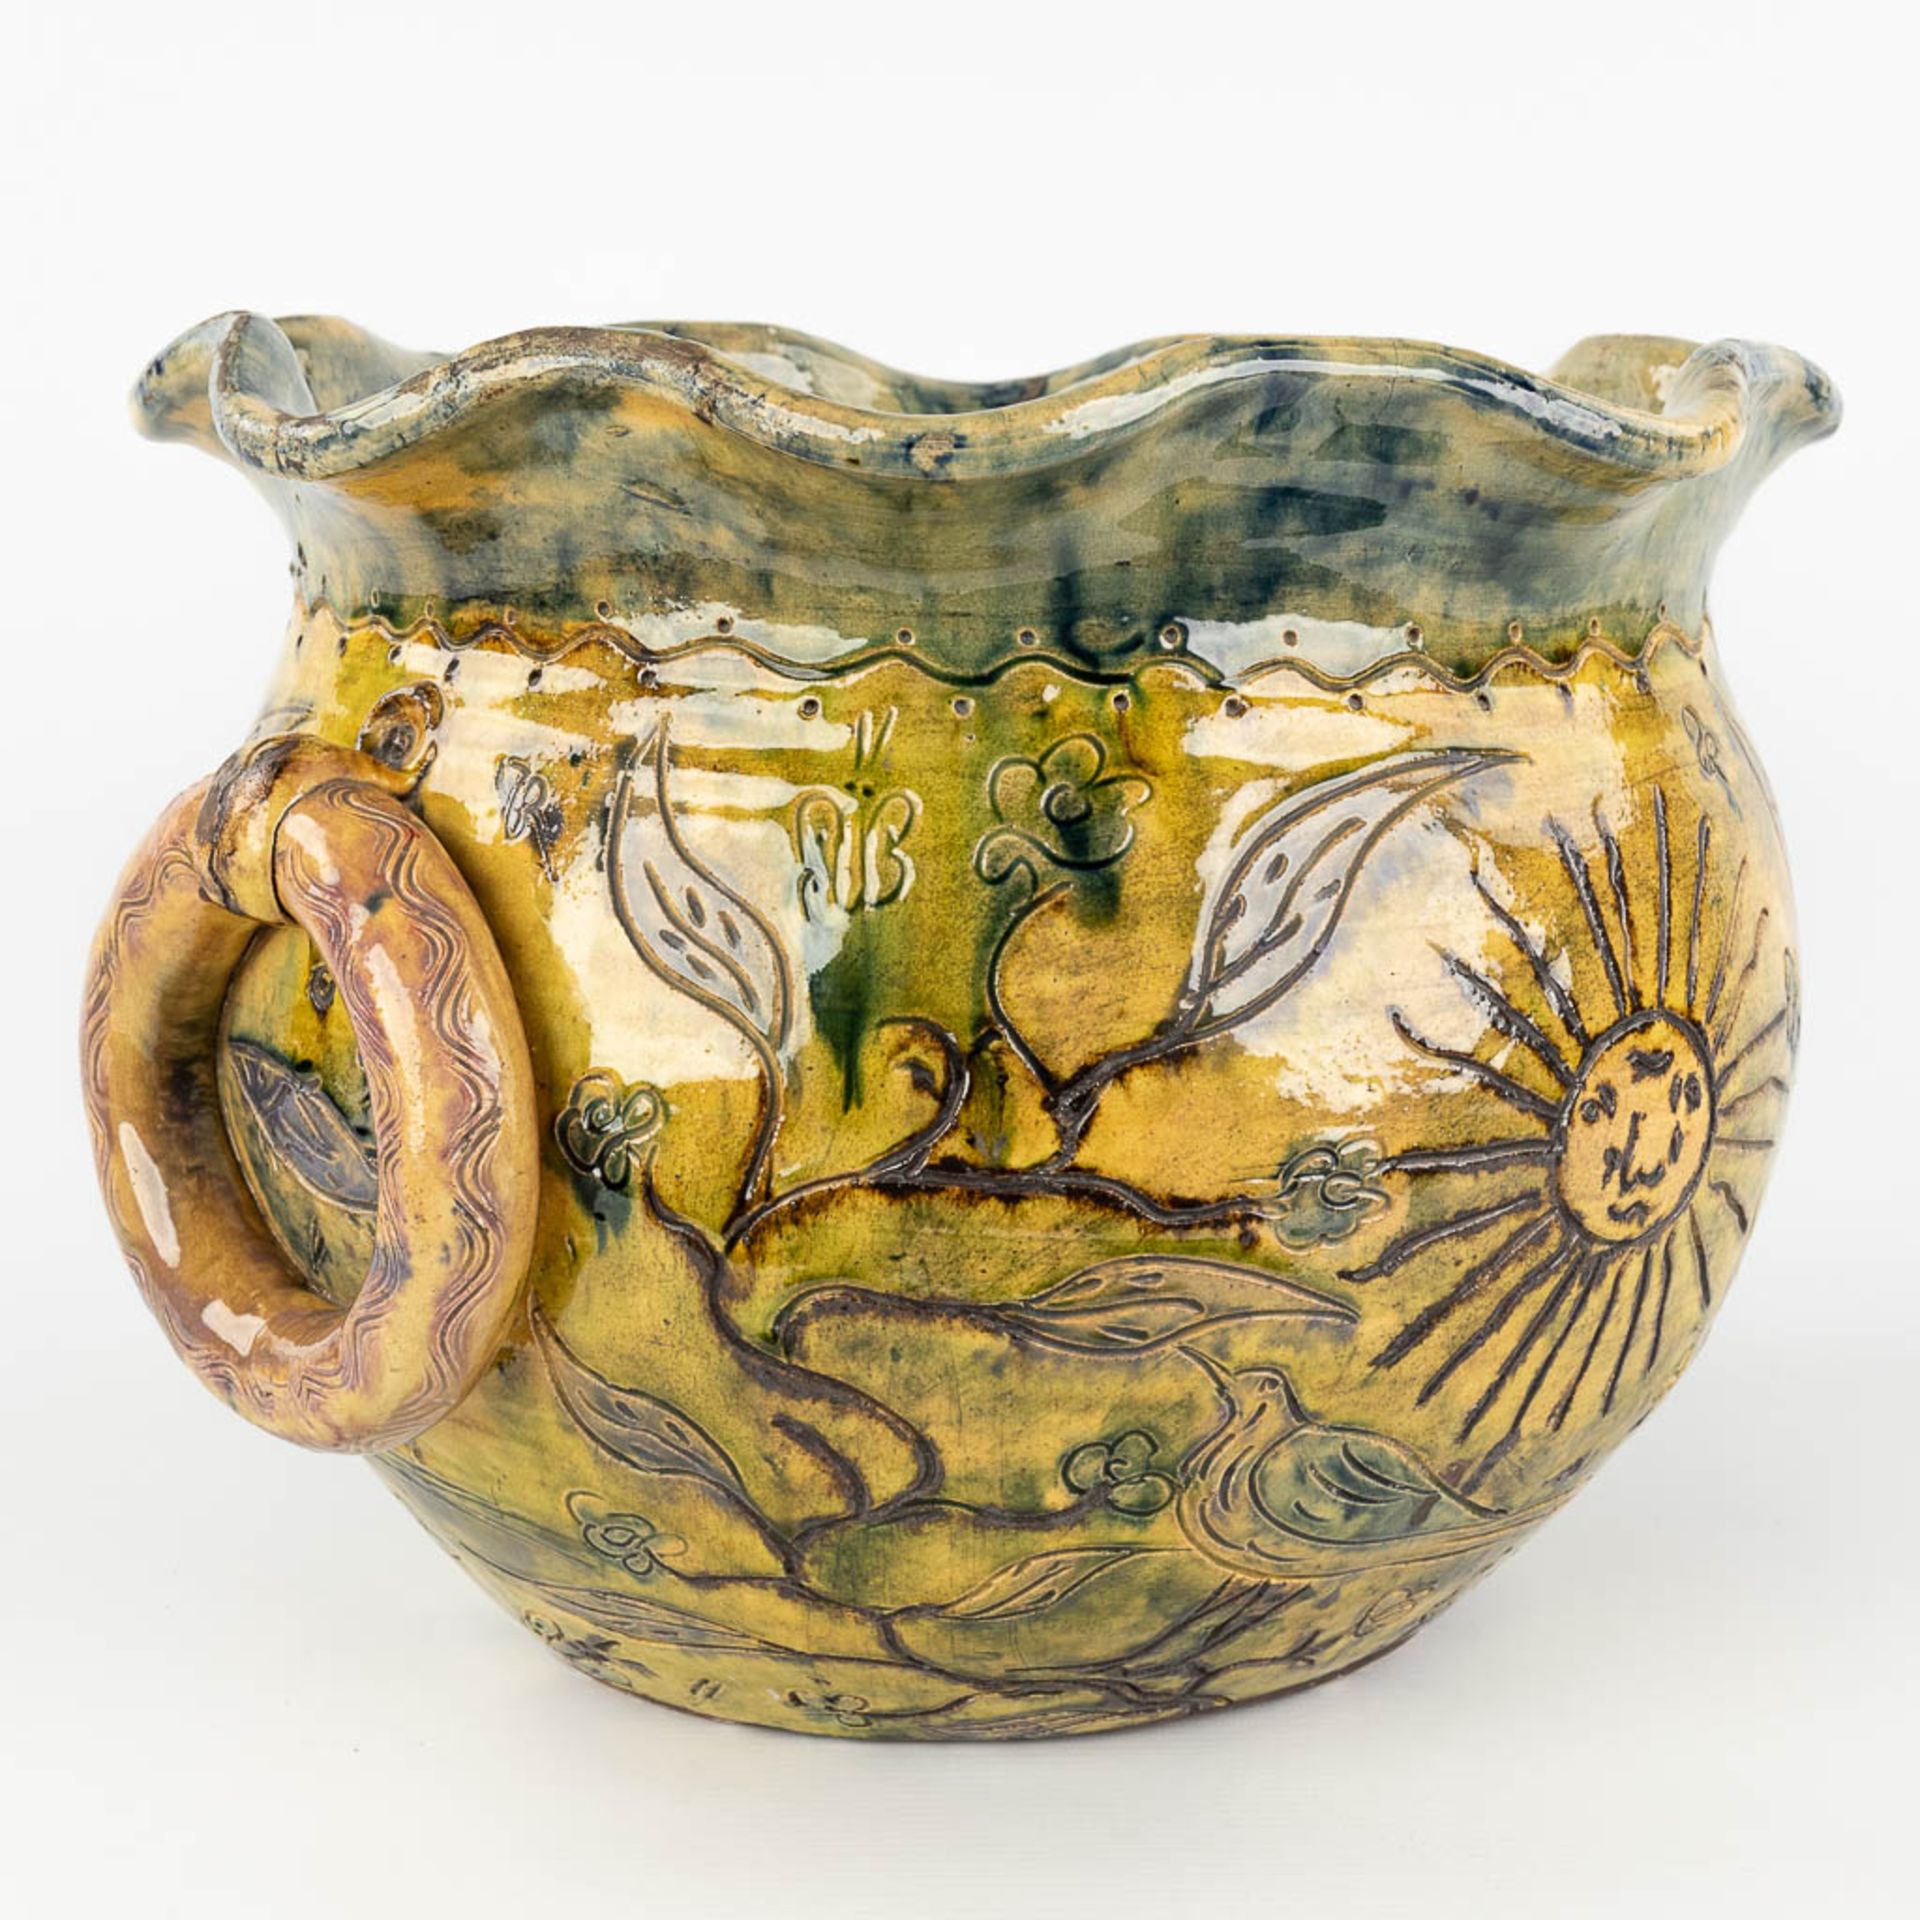 A Cache pot made of Flemish Earthenware, Bredene. 19th century. (L: 36,5 x W: 40 x H: 28 cm) - Image 3 of 12